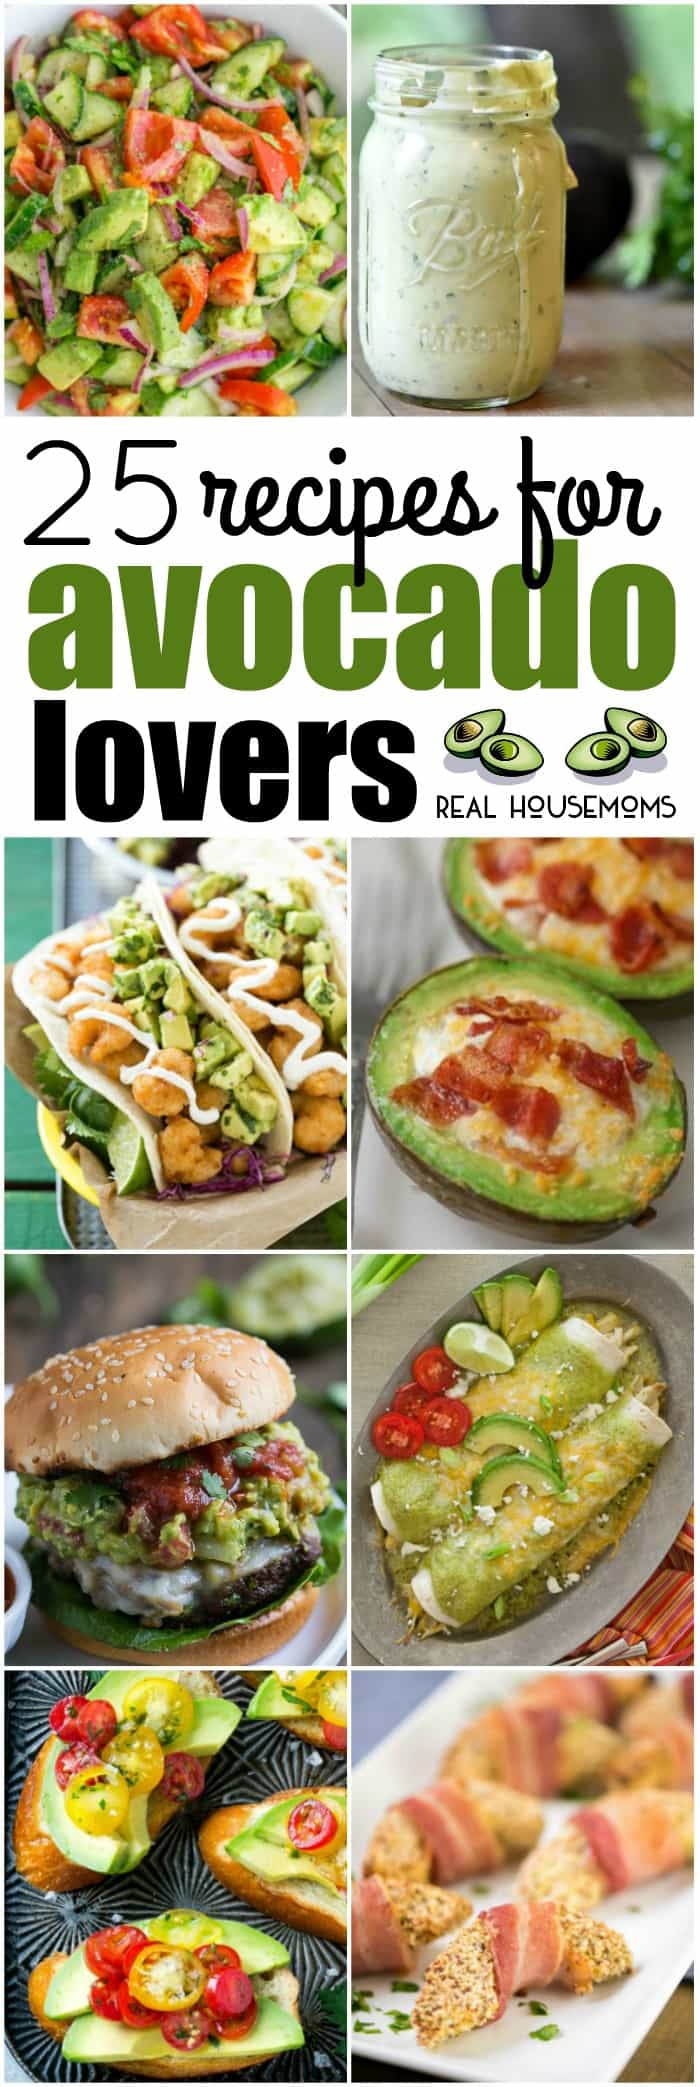 Grab your favorite green fruit and get ready to make these 25 Recipes for Avocado Lovers! We have recipes for every meal of the day so you can get your fix whenever you want!